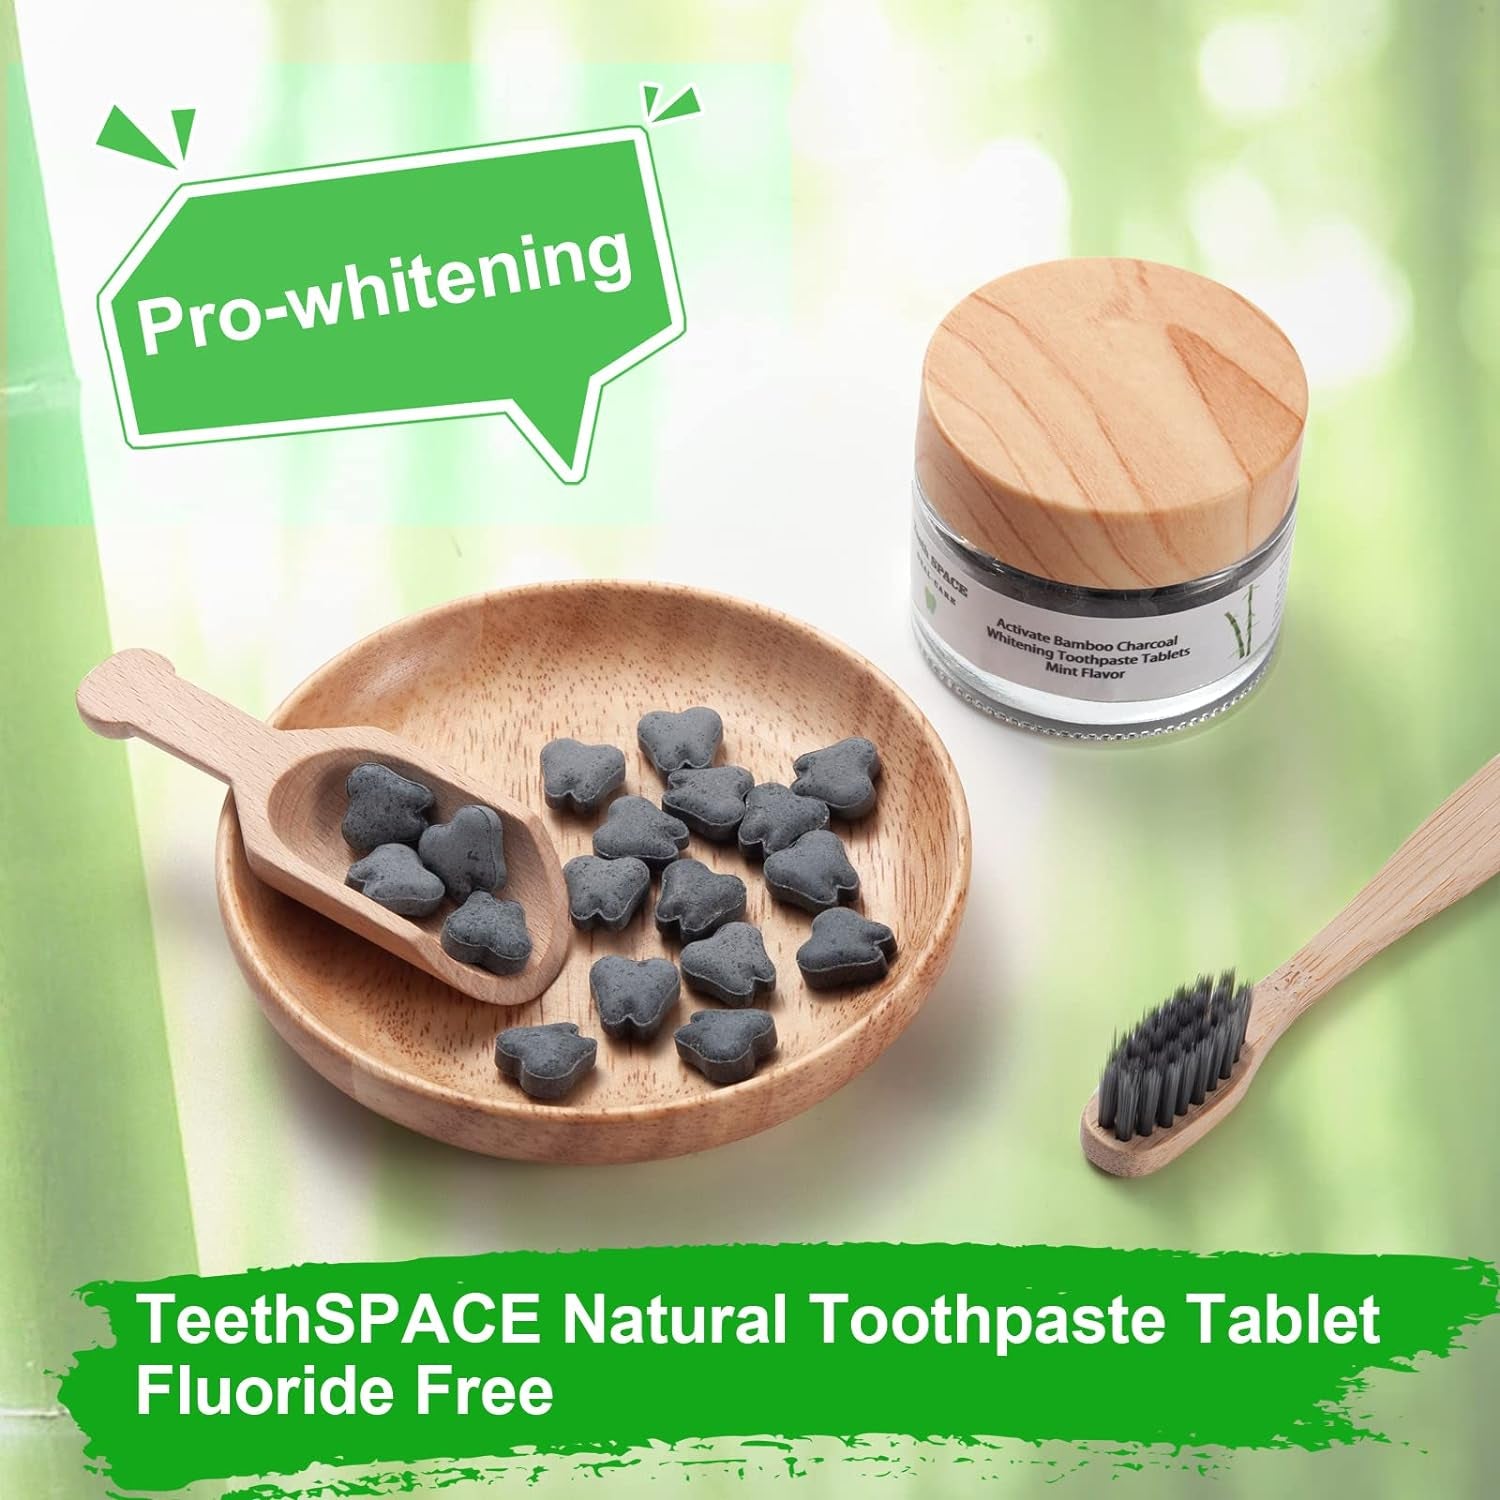 Activated Bamboo Charcoal Fresh Breath Travel Toothpaste Tablets,Teeth Whitening & Tartar Control,Eco Friendly Product,Fluoride Free,Tsa Compliant,55 Tablets